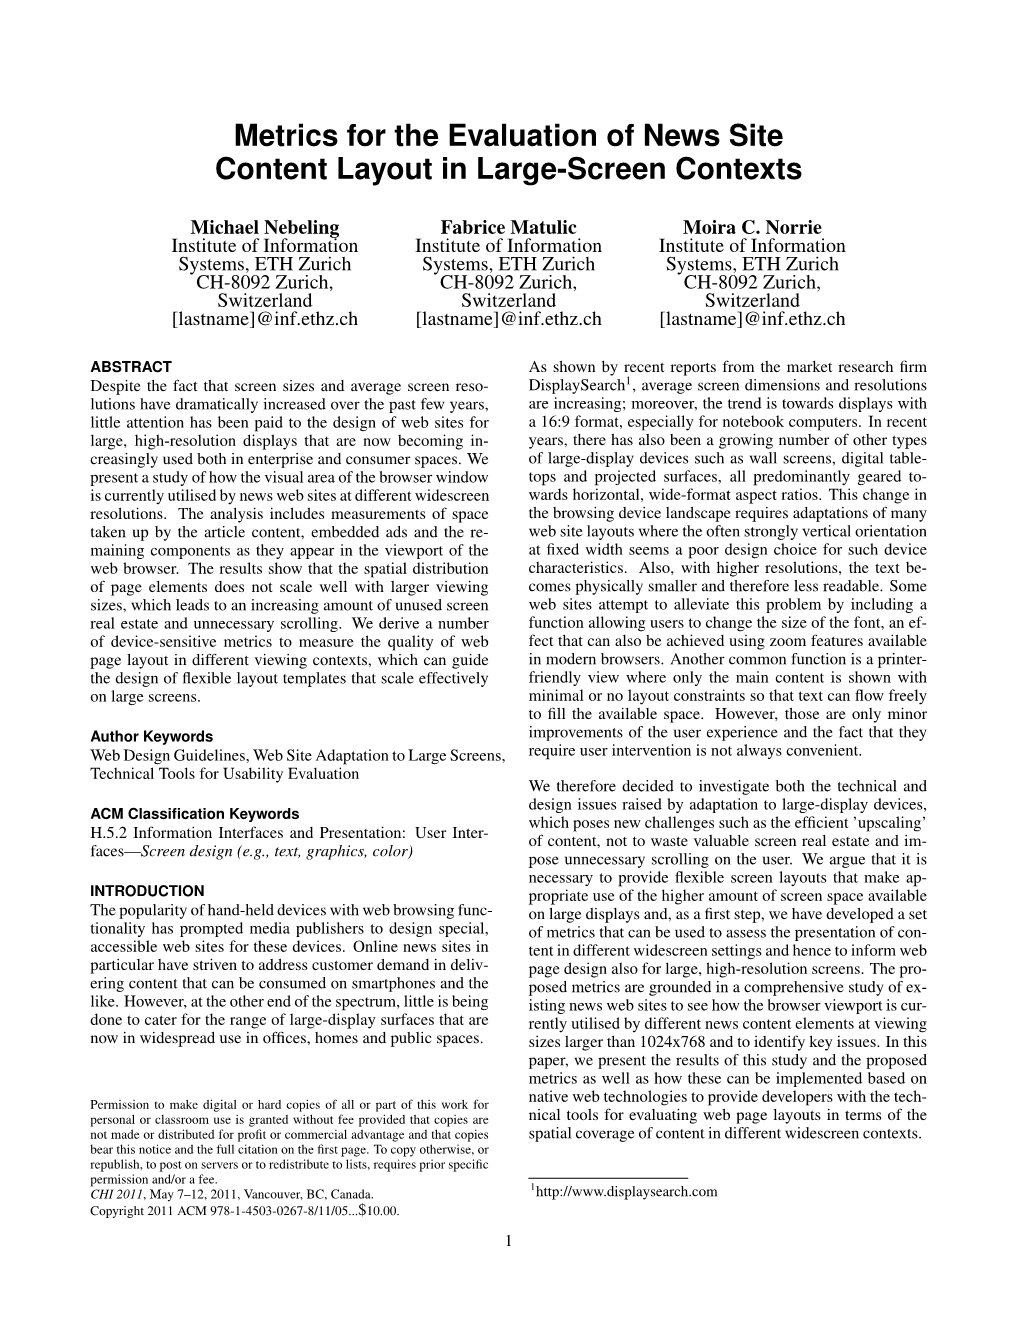 Metrics for the Evaluation of News Site Content Layout in Large-Screen Contexts